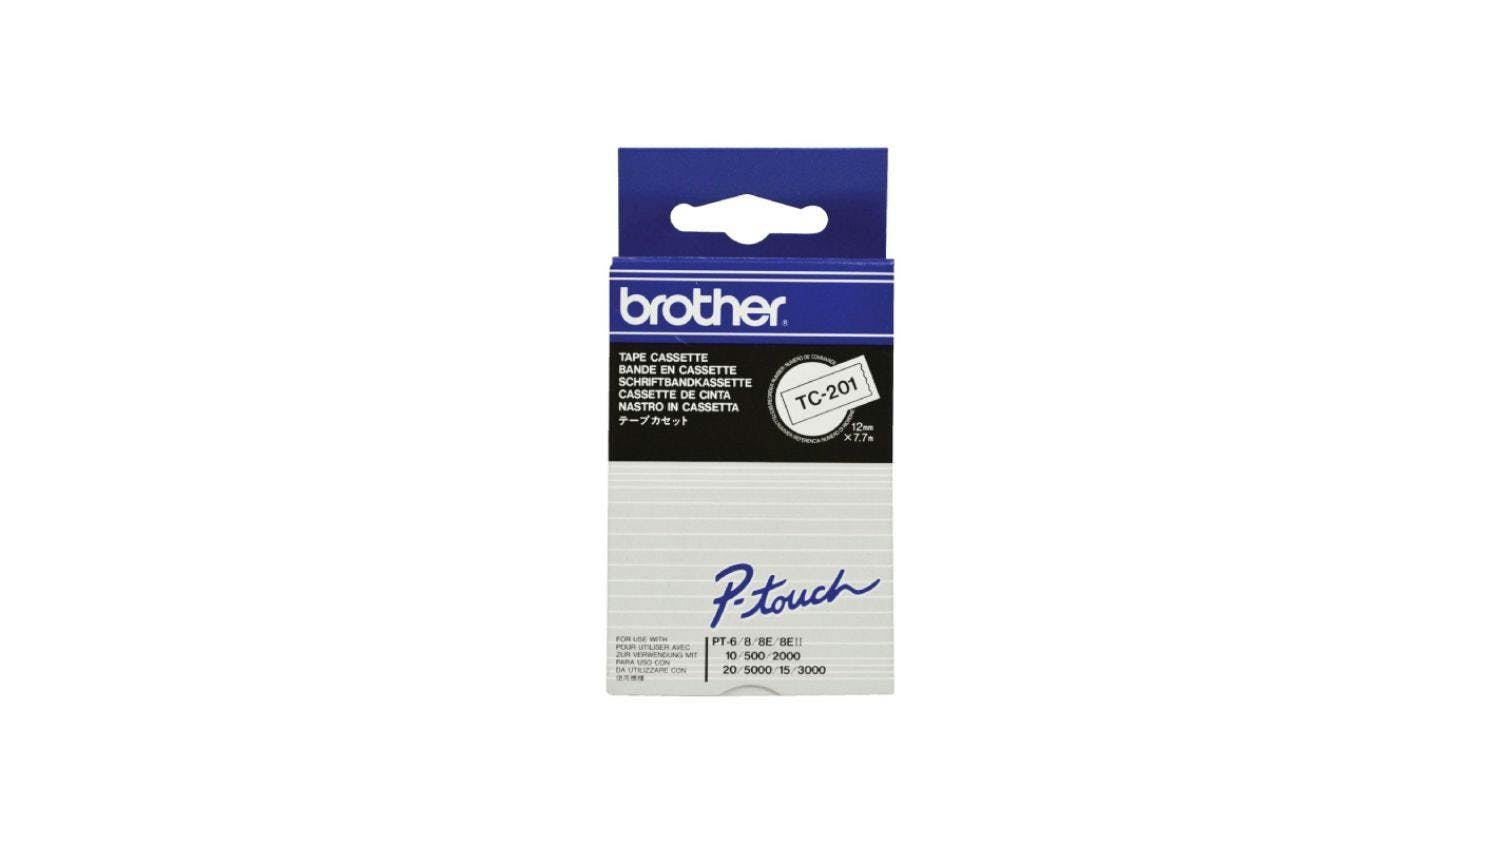 Brother TC201 Black on White Labelling Tape - 12mm x 8m